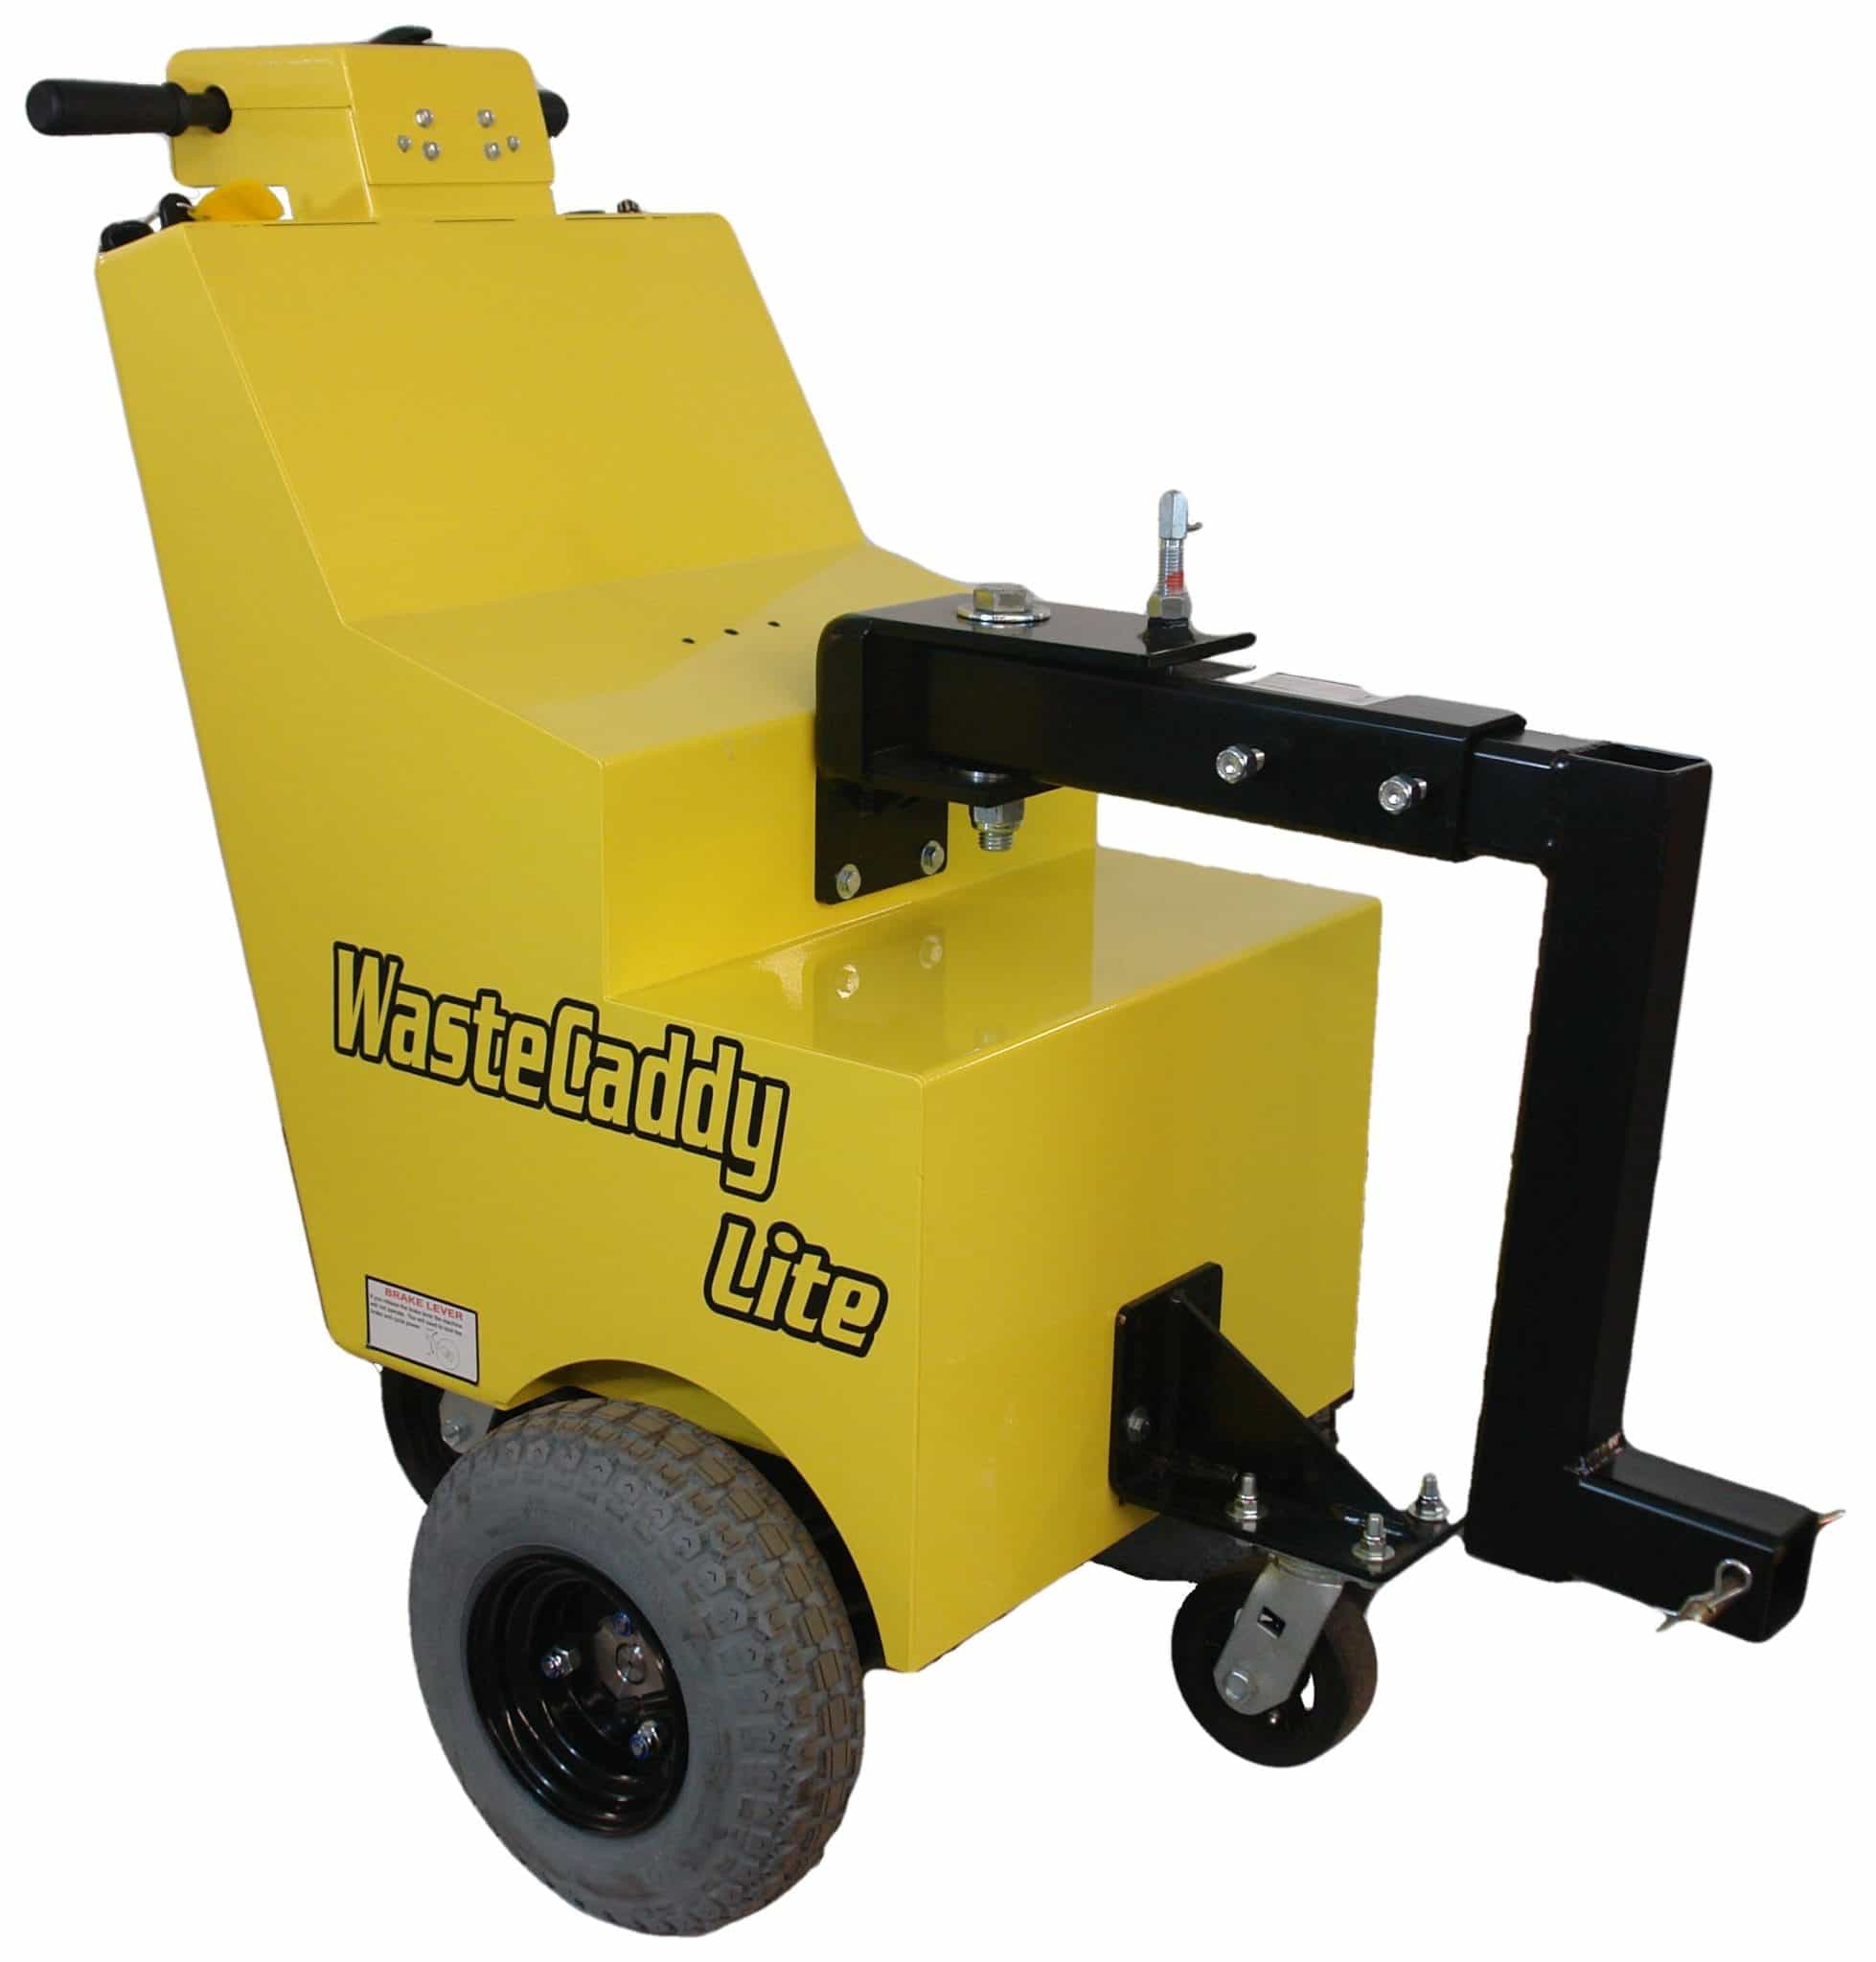 WasteCaddyLite – Trash Container Mover